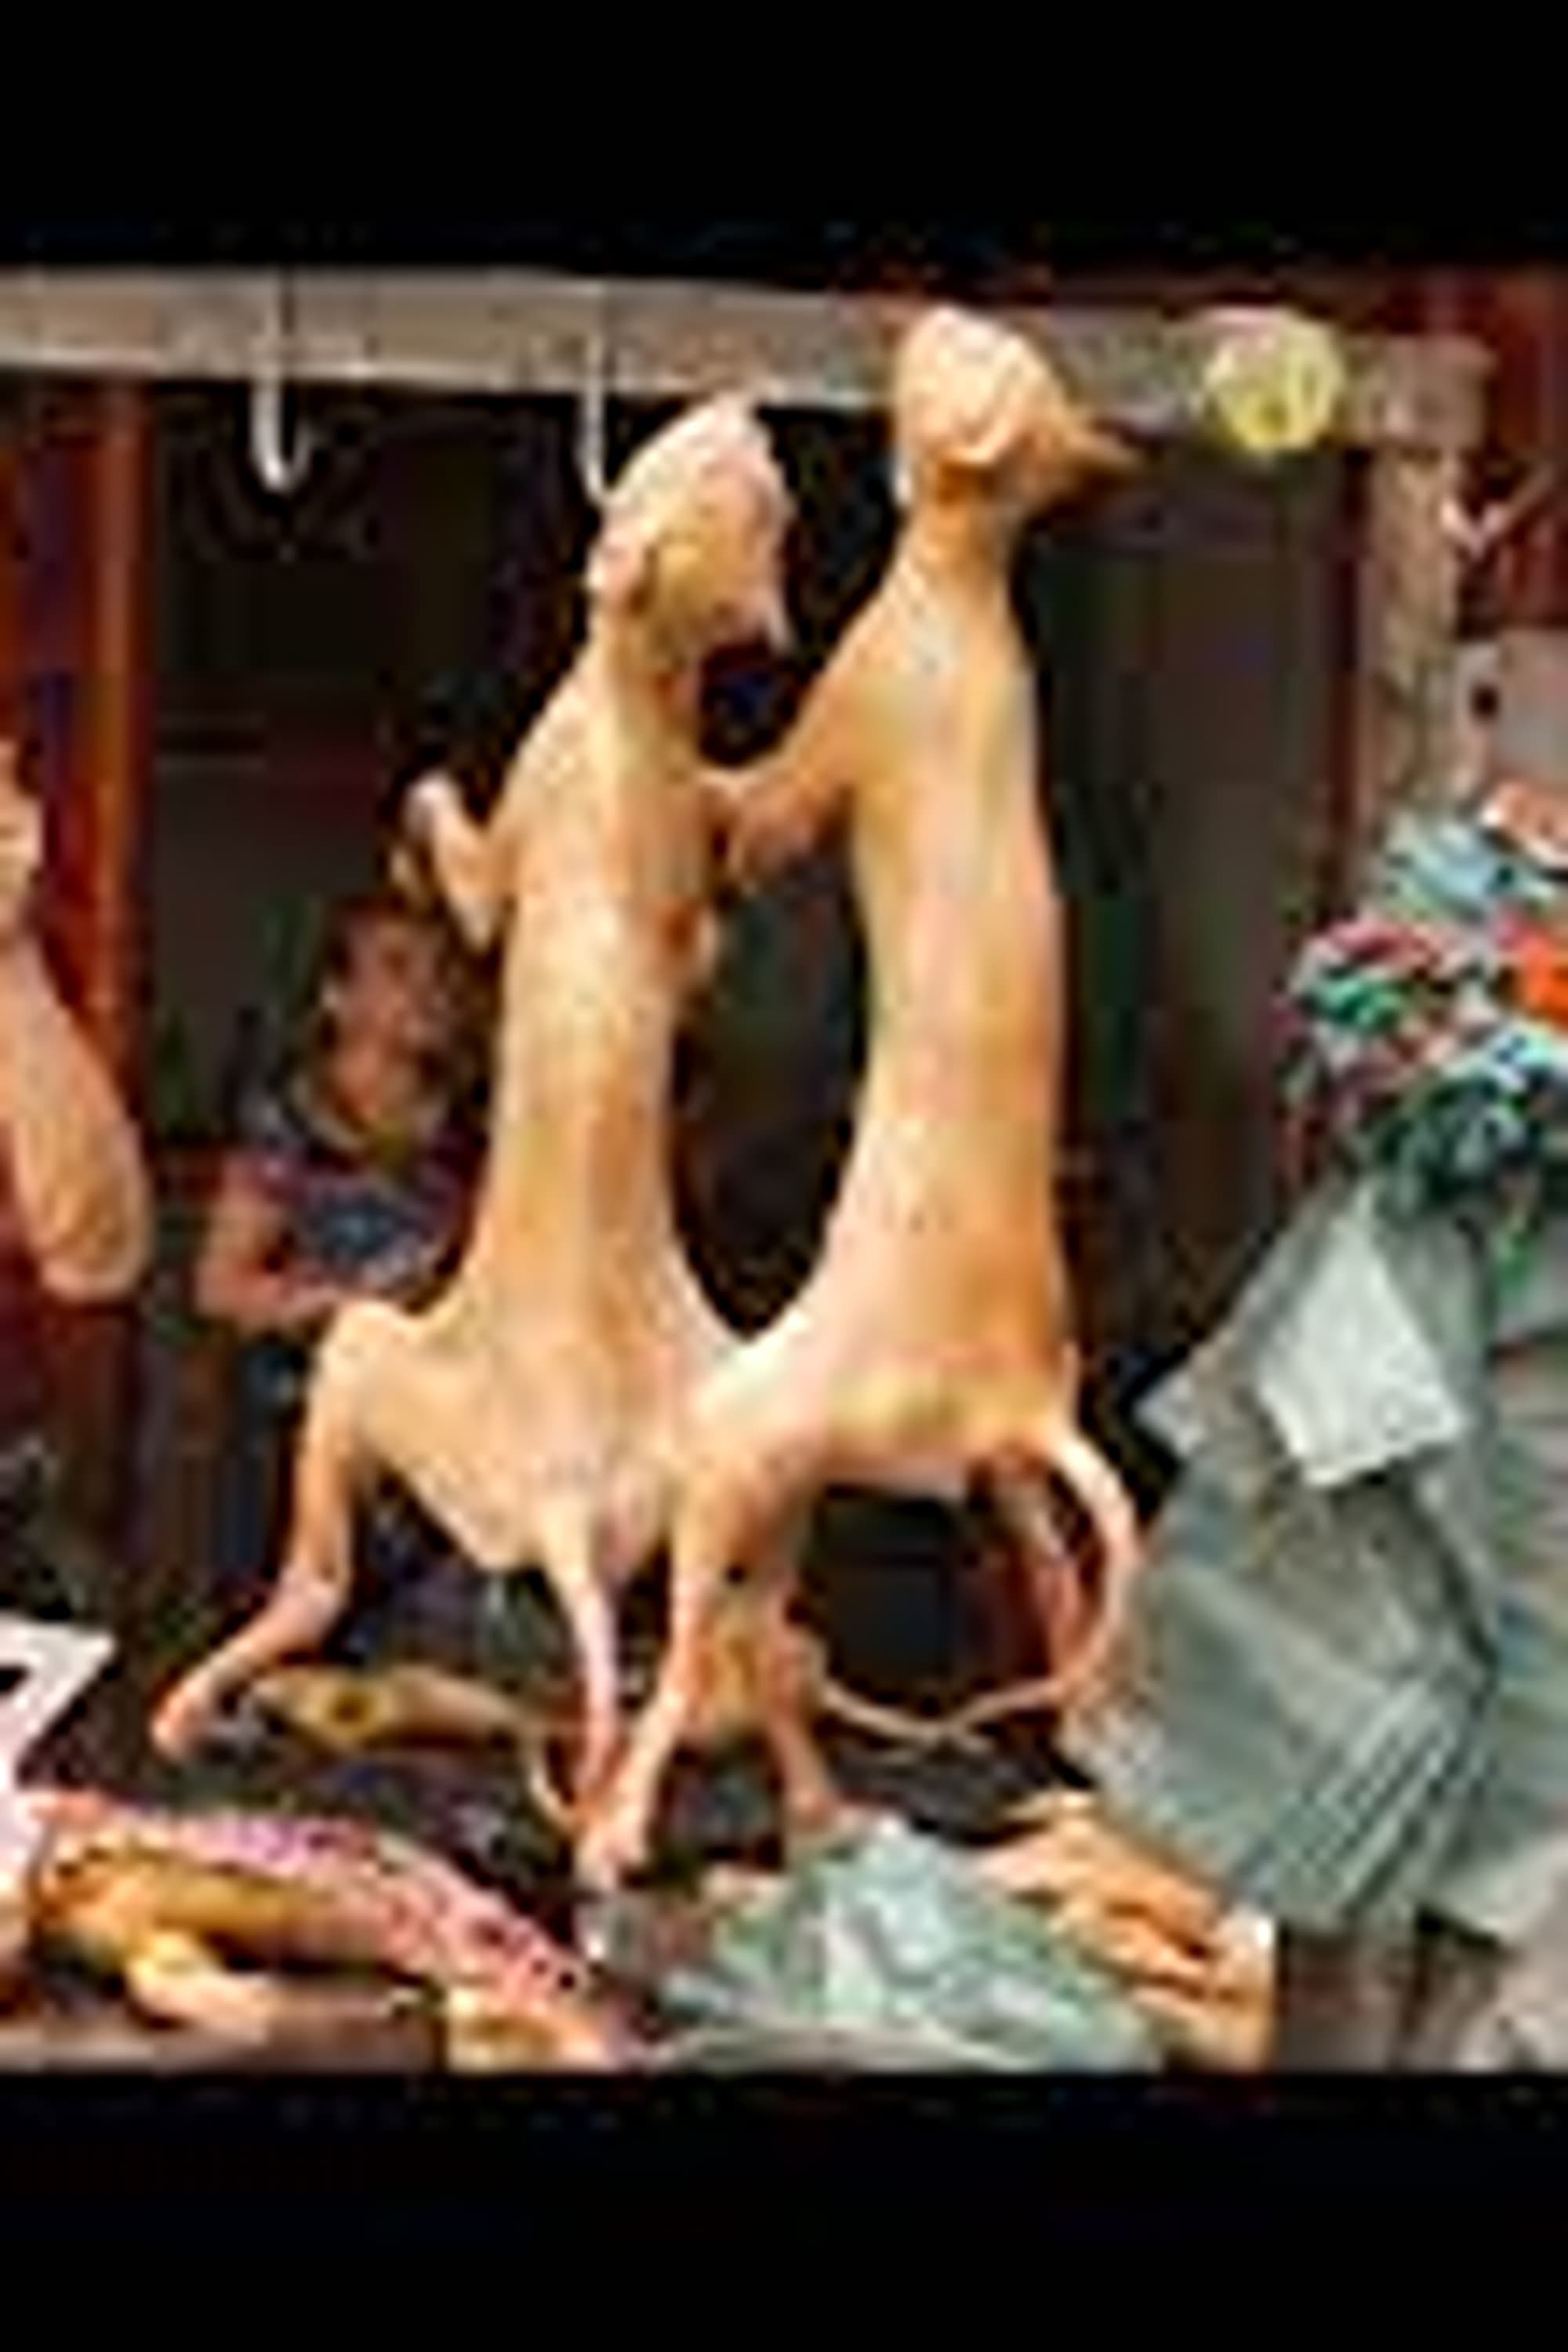 Dining on Dogs in Yulin